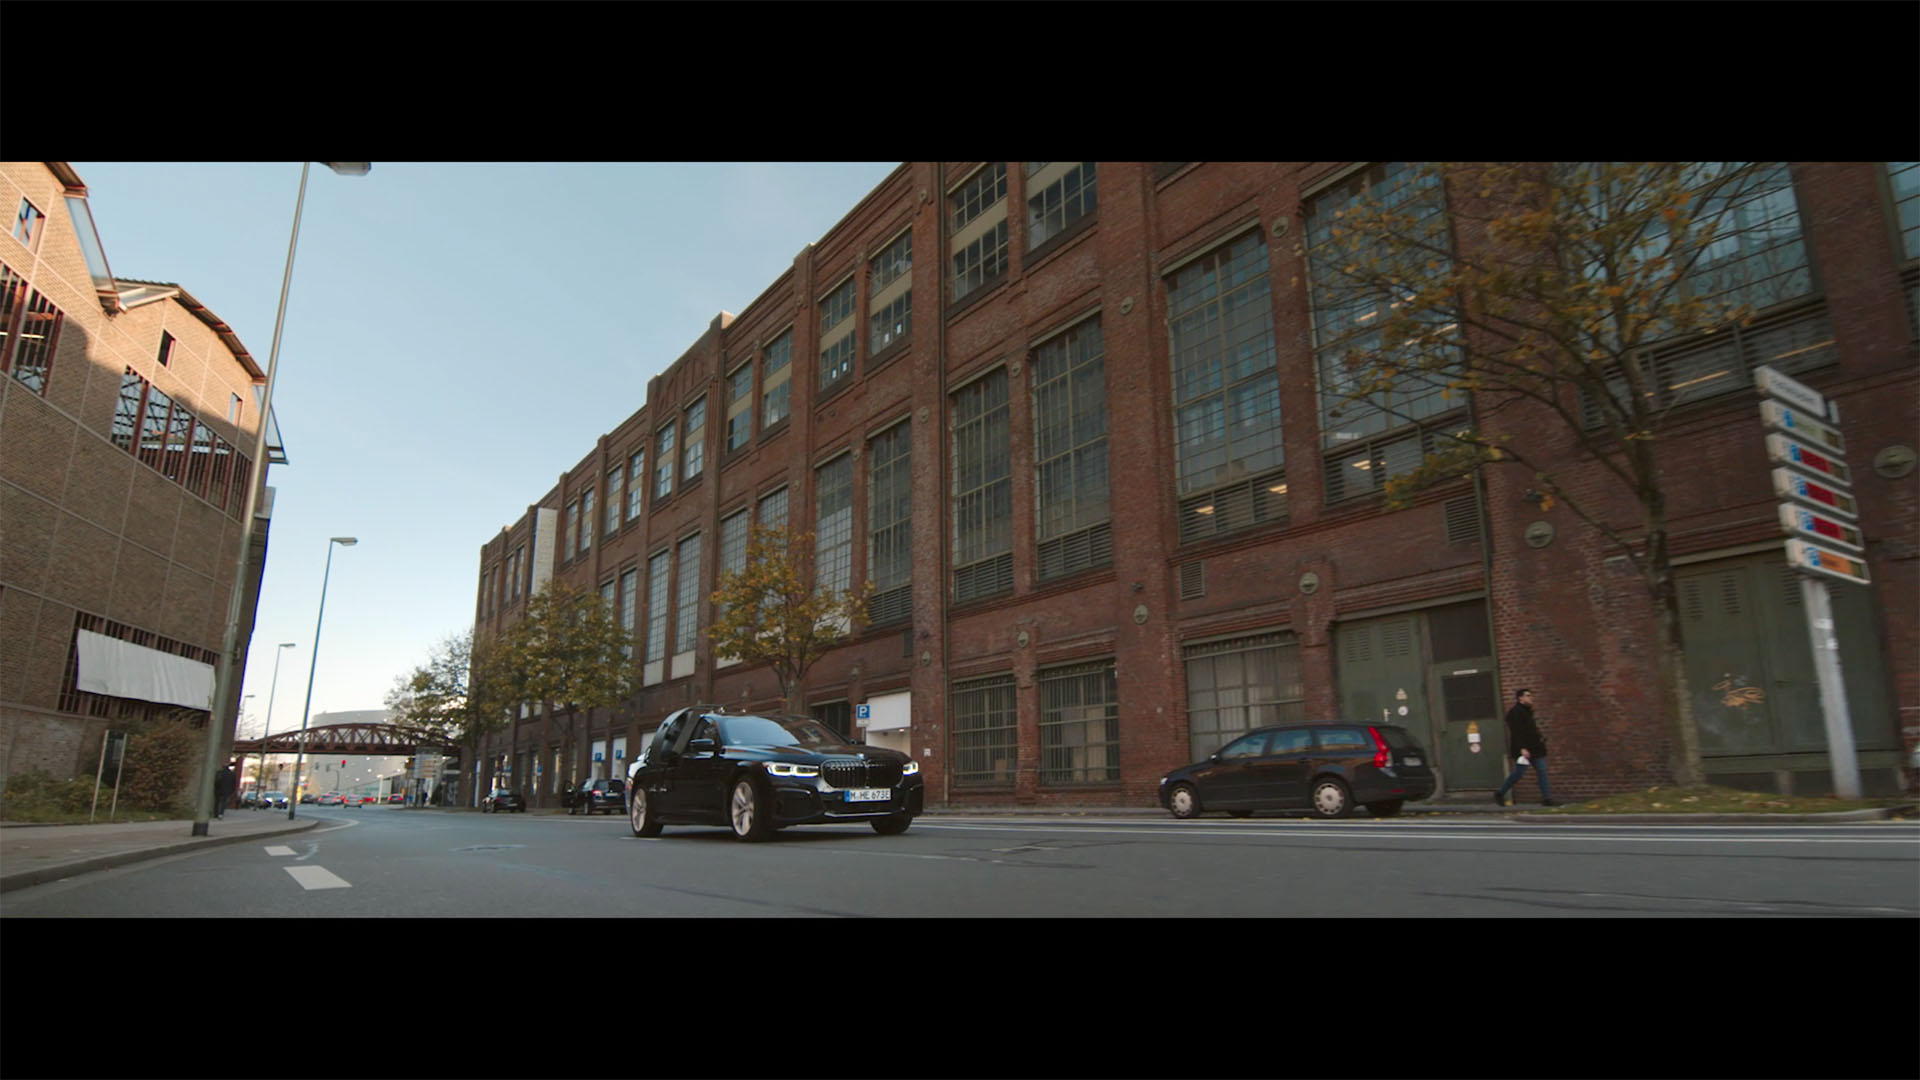 COMMERCIAL: SEE THE CITY ANEW